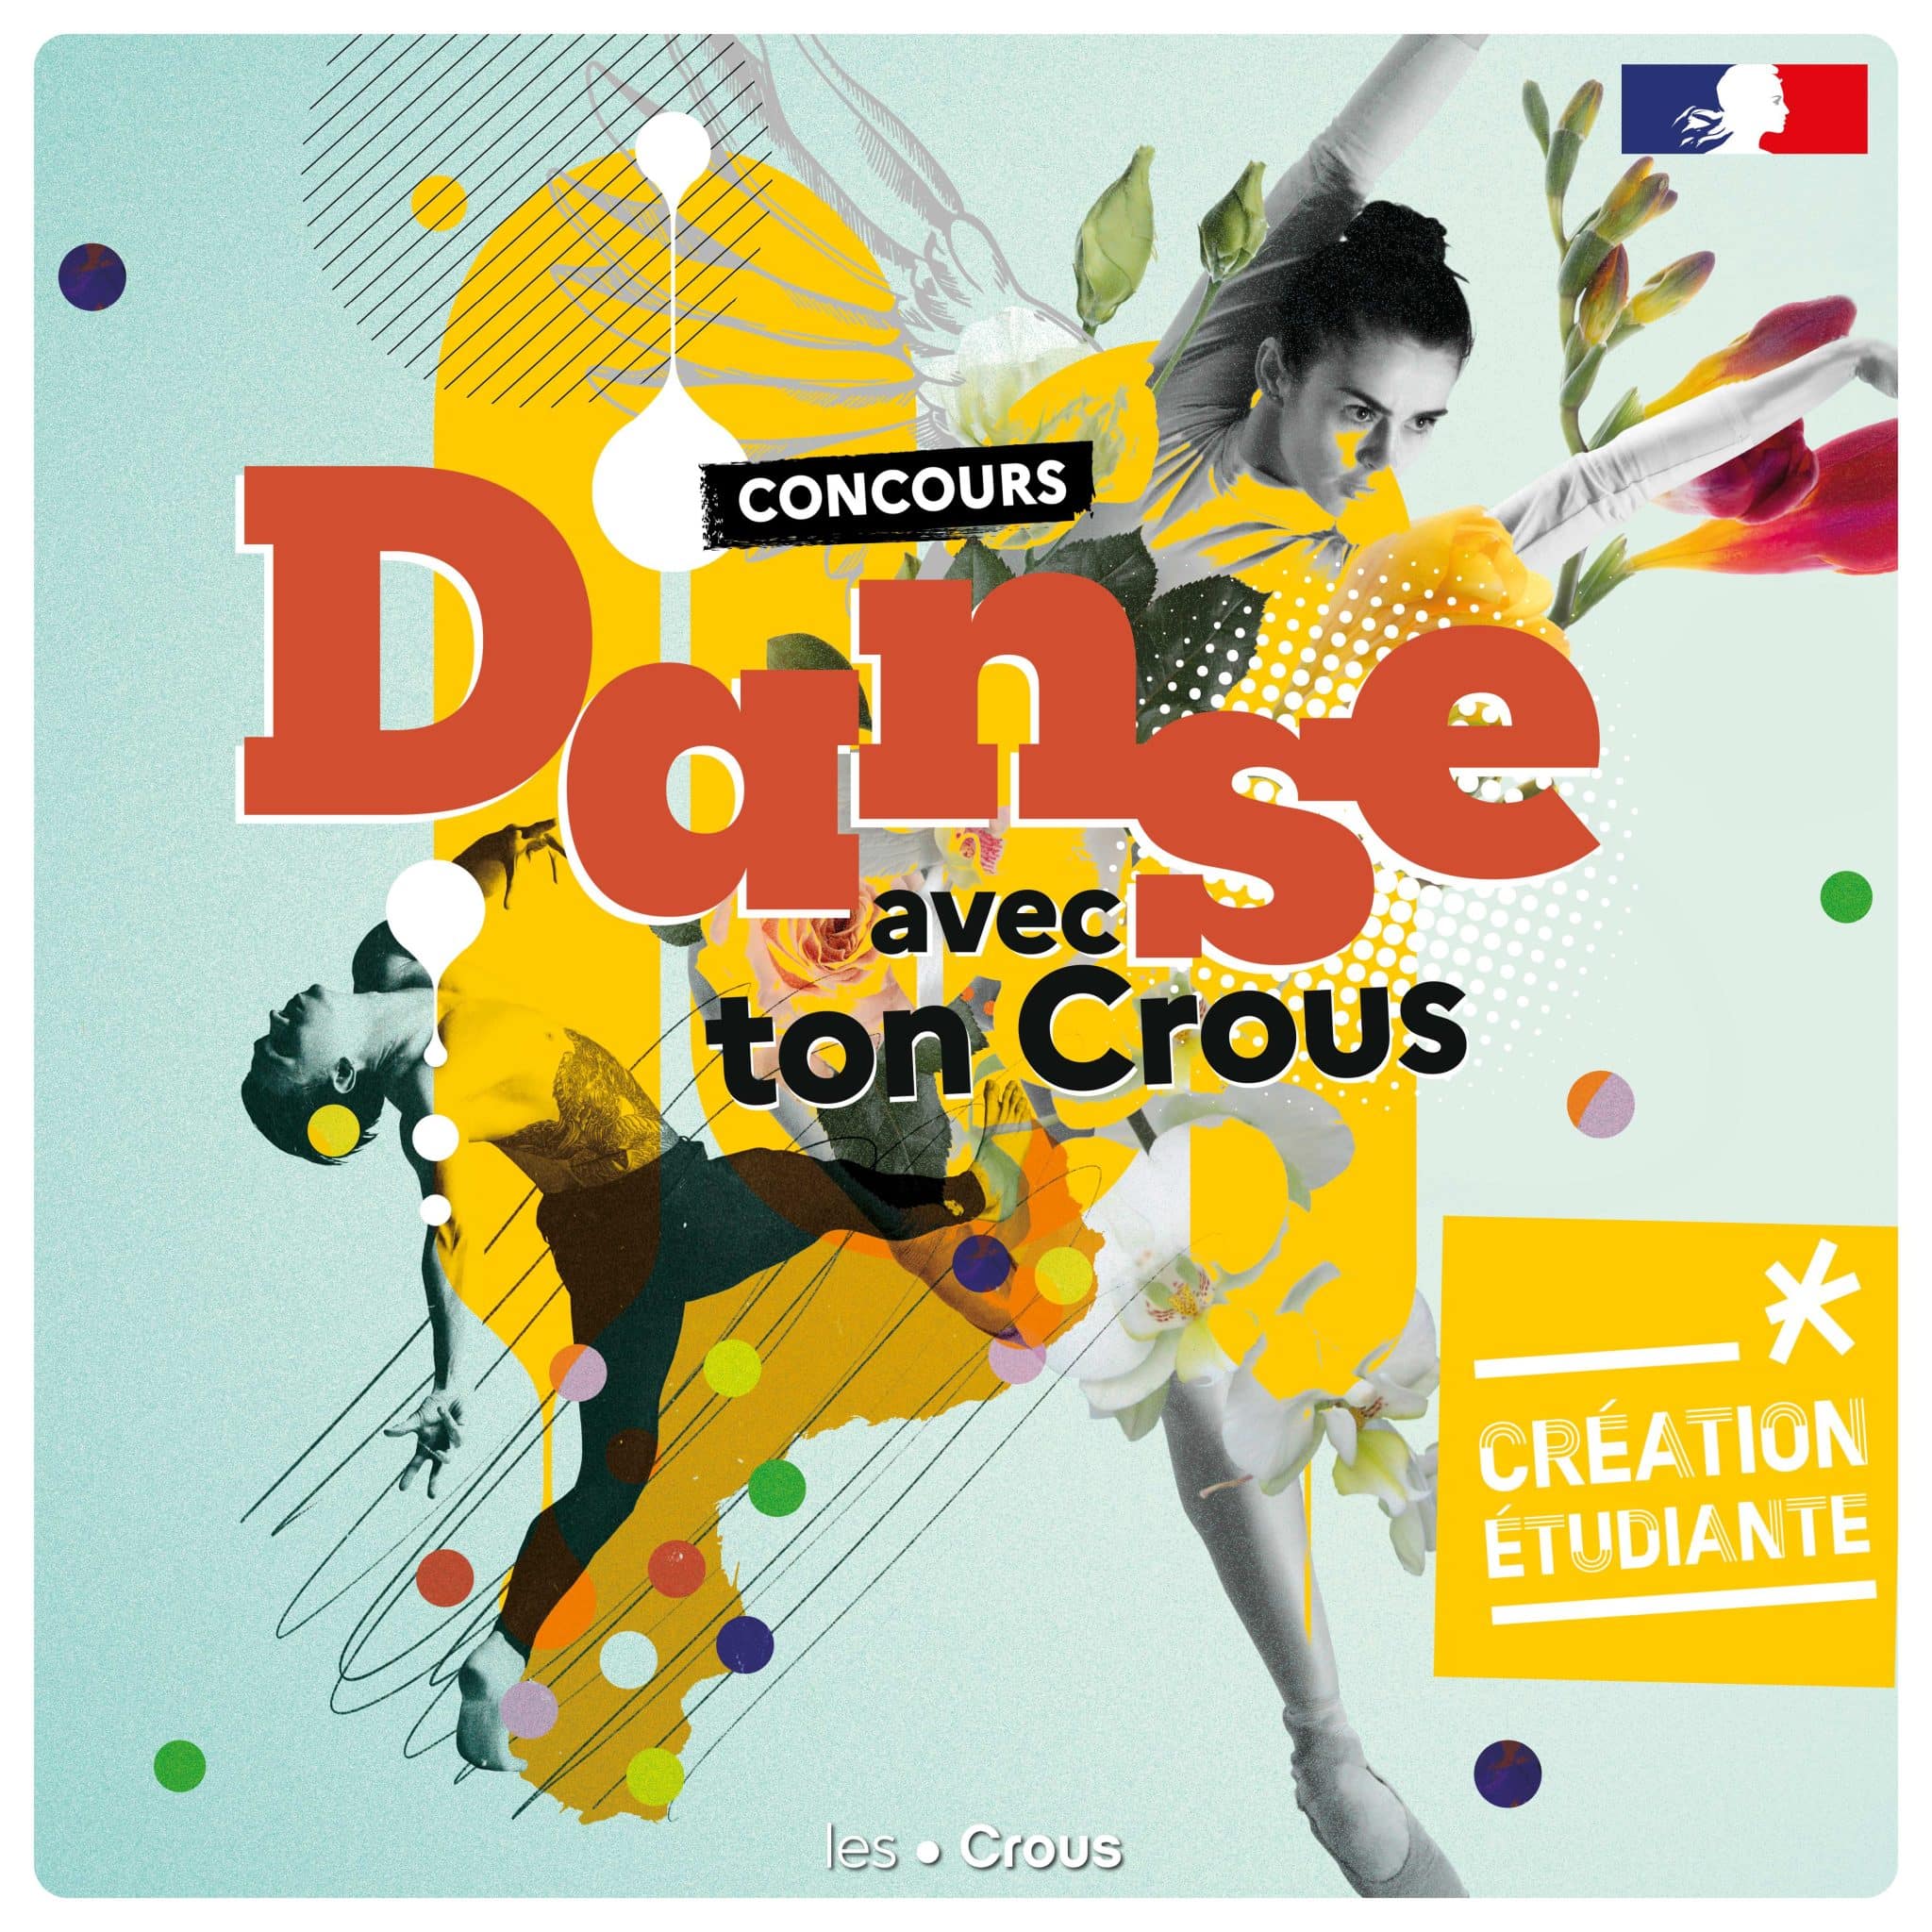 0143 23 CNOUS CAMPAGNE CULTURELLE RS DANSE2 compressed1 scaled